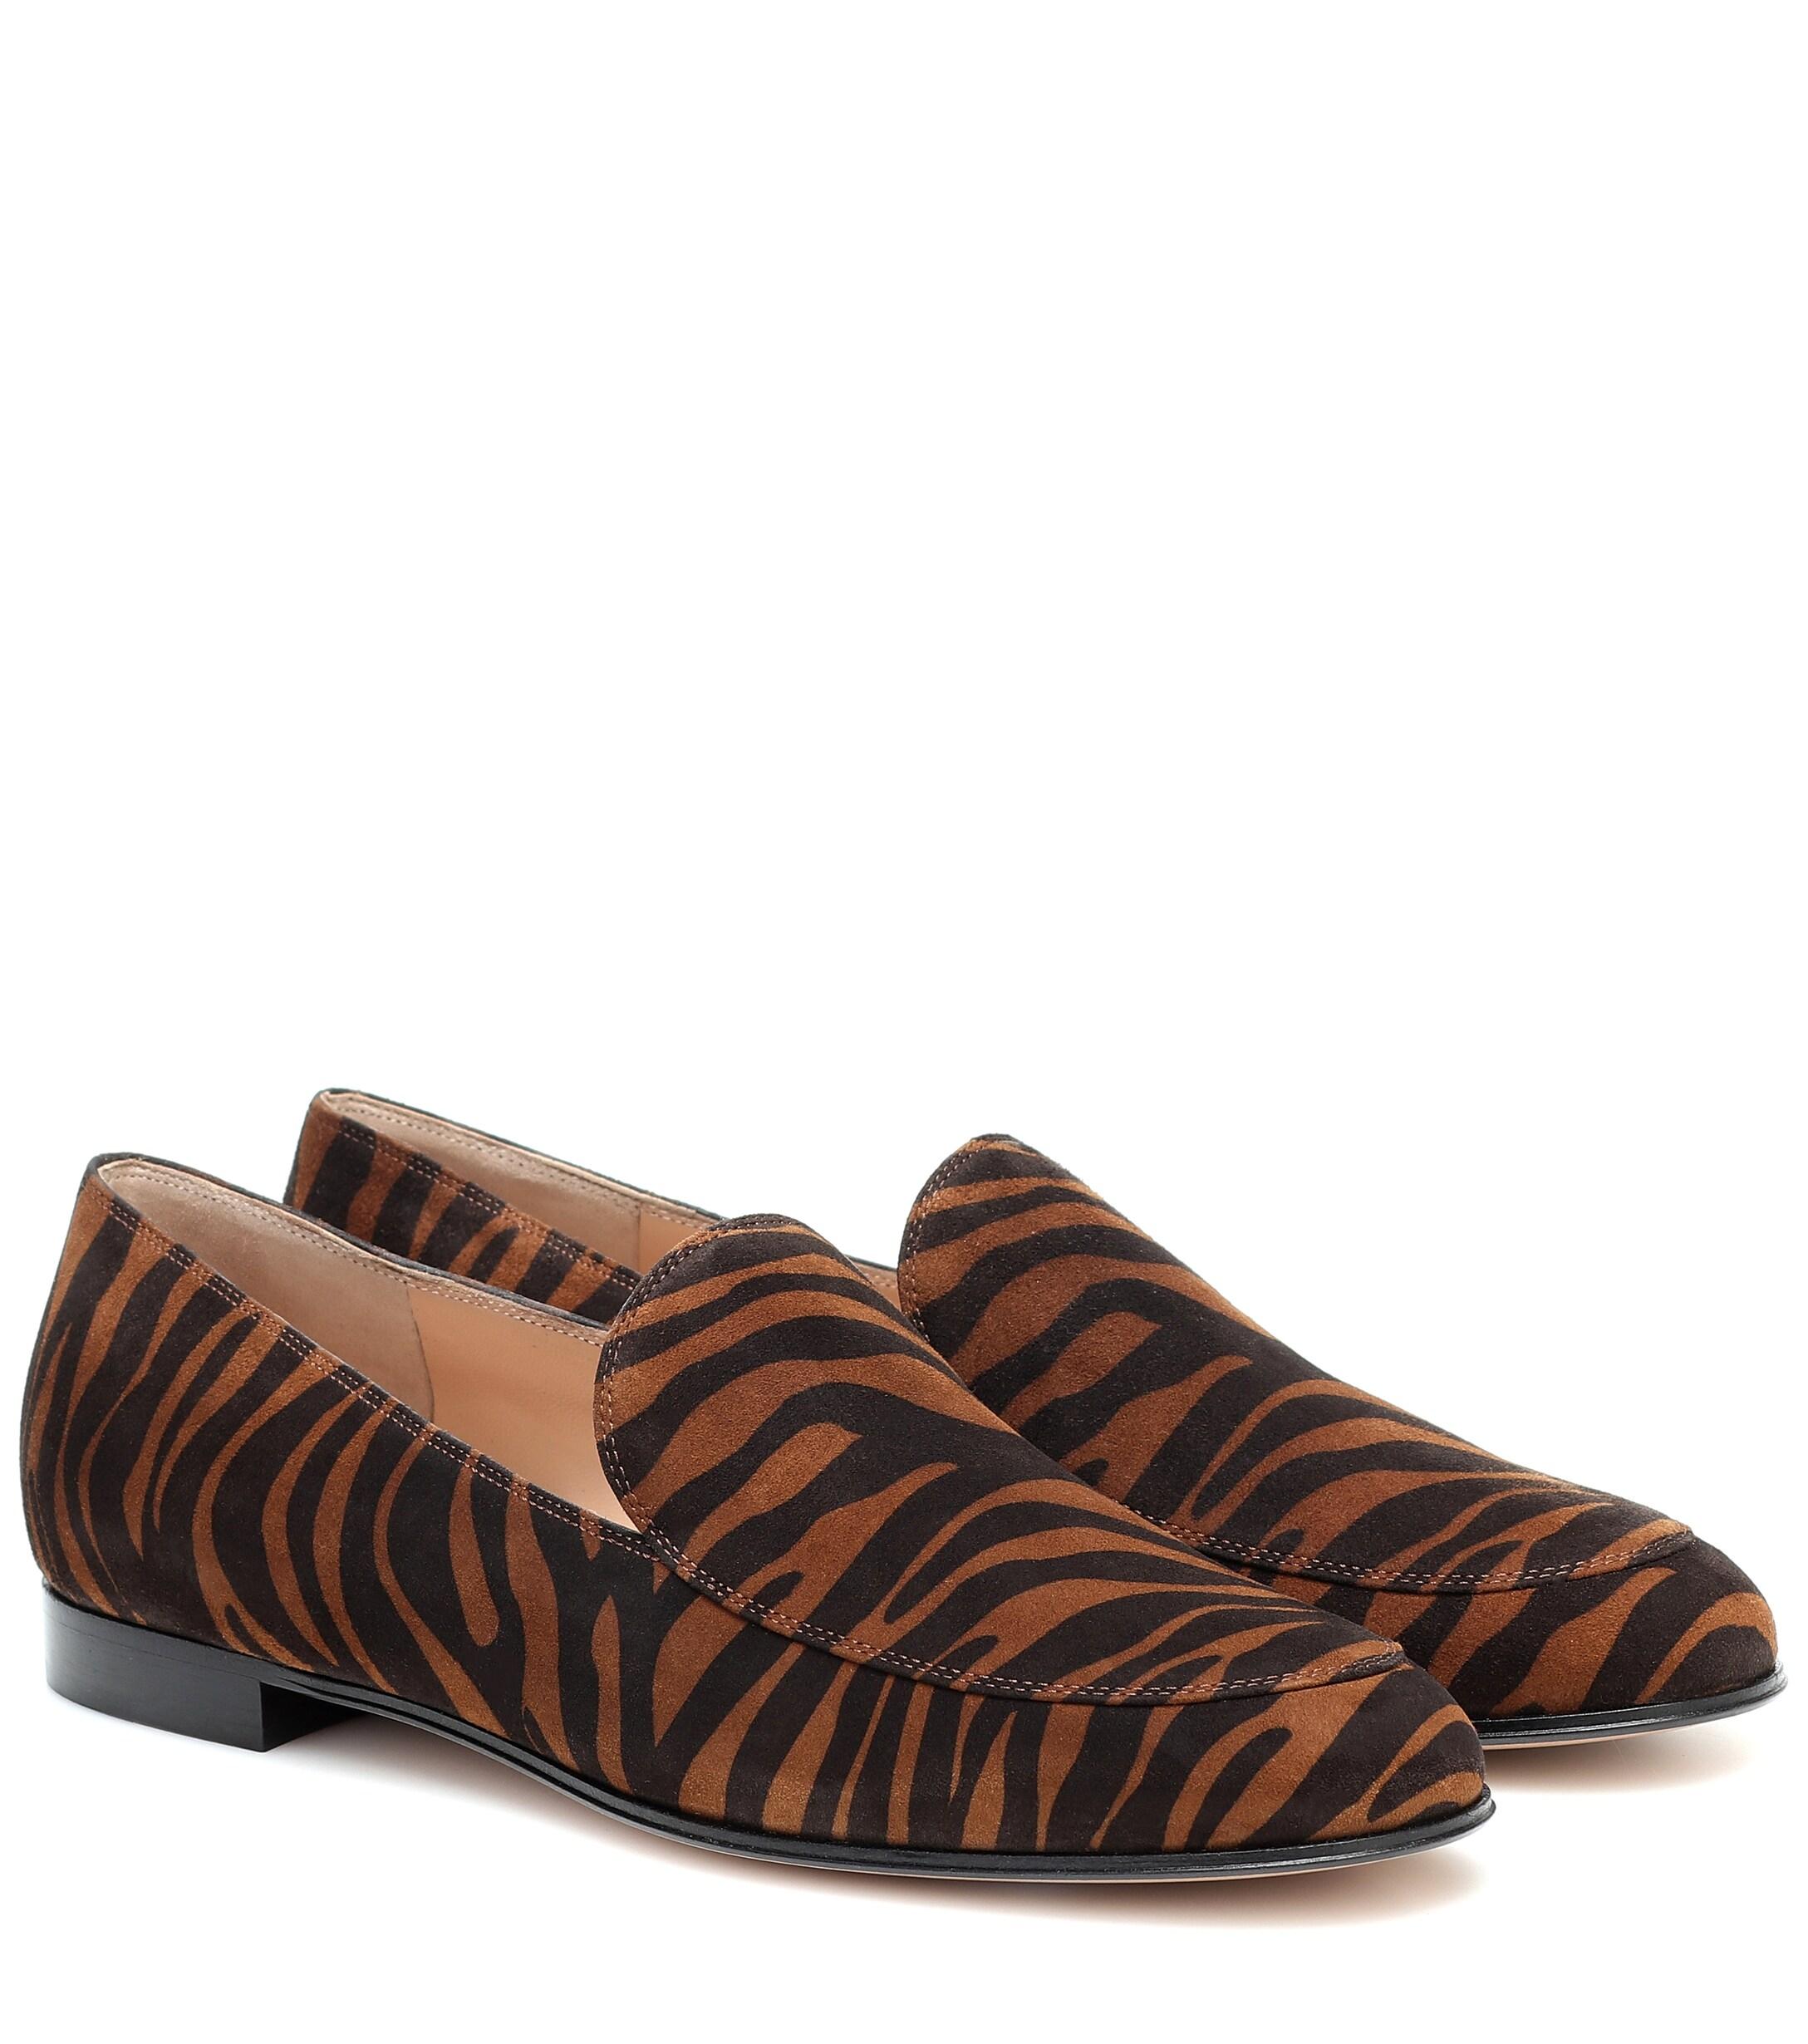 Gianvito Rossi Marcel Zebra-print Suede Loafers in Brown - Lyst